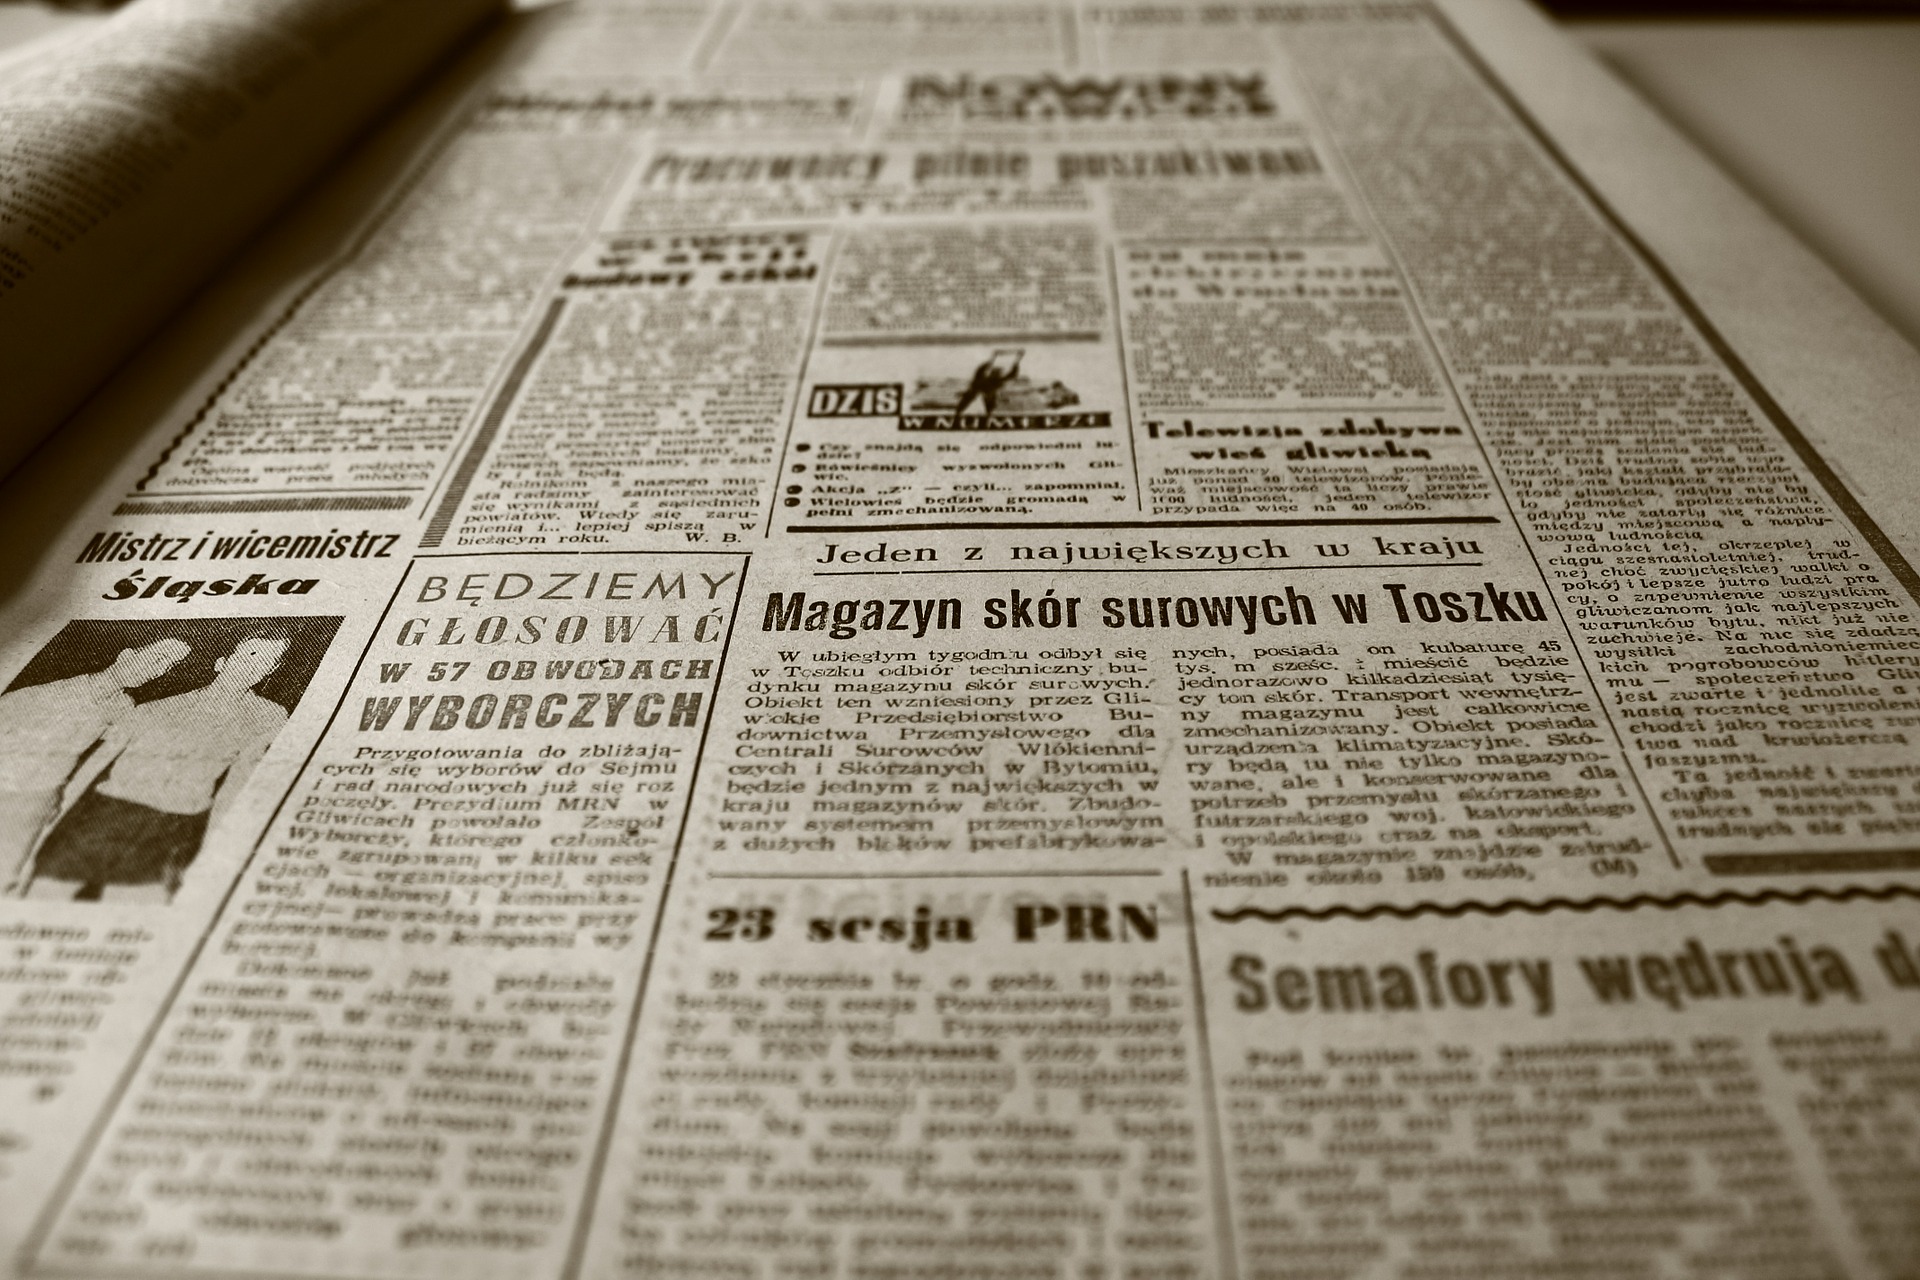 Vintage Newspaper that is written in a Nordic language with indiscernible text.